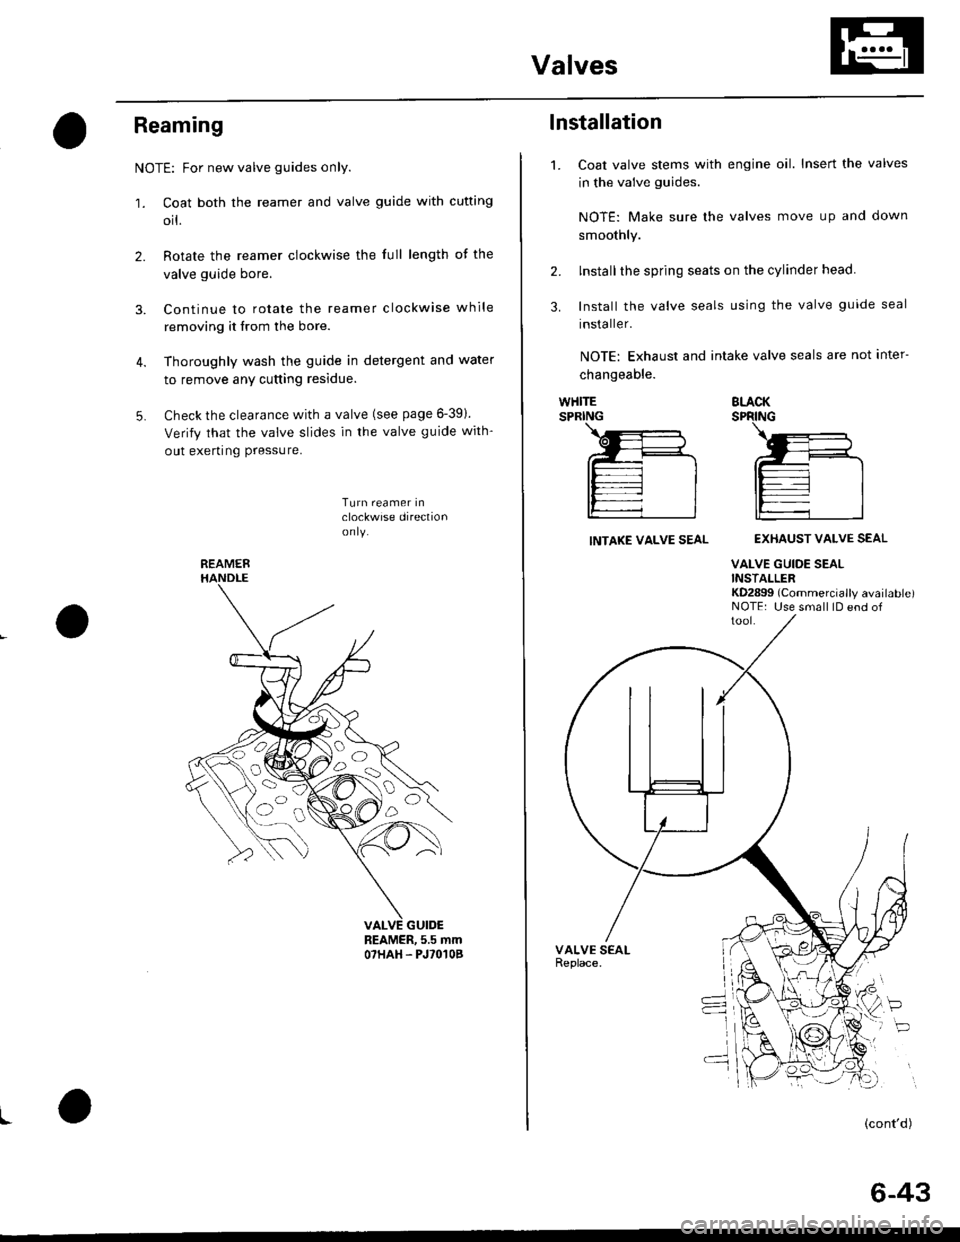 HONDA CIVIC 1998 6.G Workshop Manual Valves
Reaming
NOTE: For new valve guides only.
1. Coat both the reamer and valve guide with cufting
orl.
2. Rotate the reamer clockwise the full length of the
valve guide bore.
3. Continue to rotate 